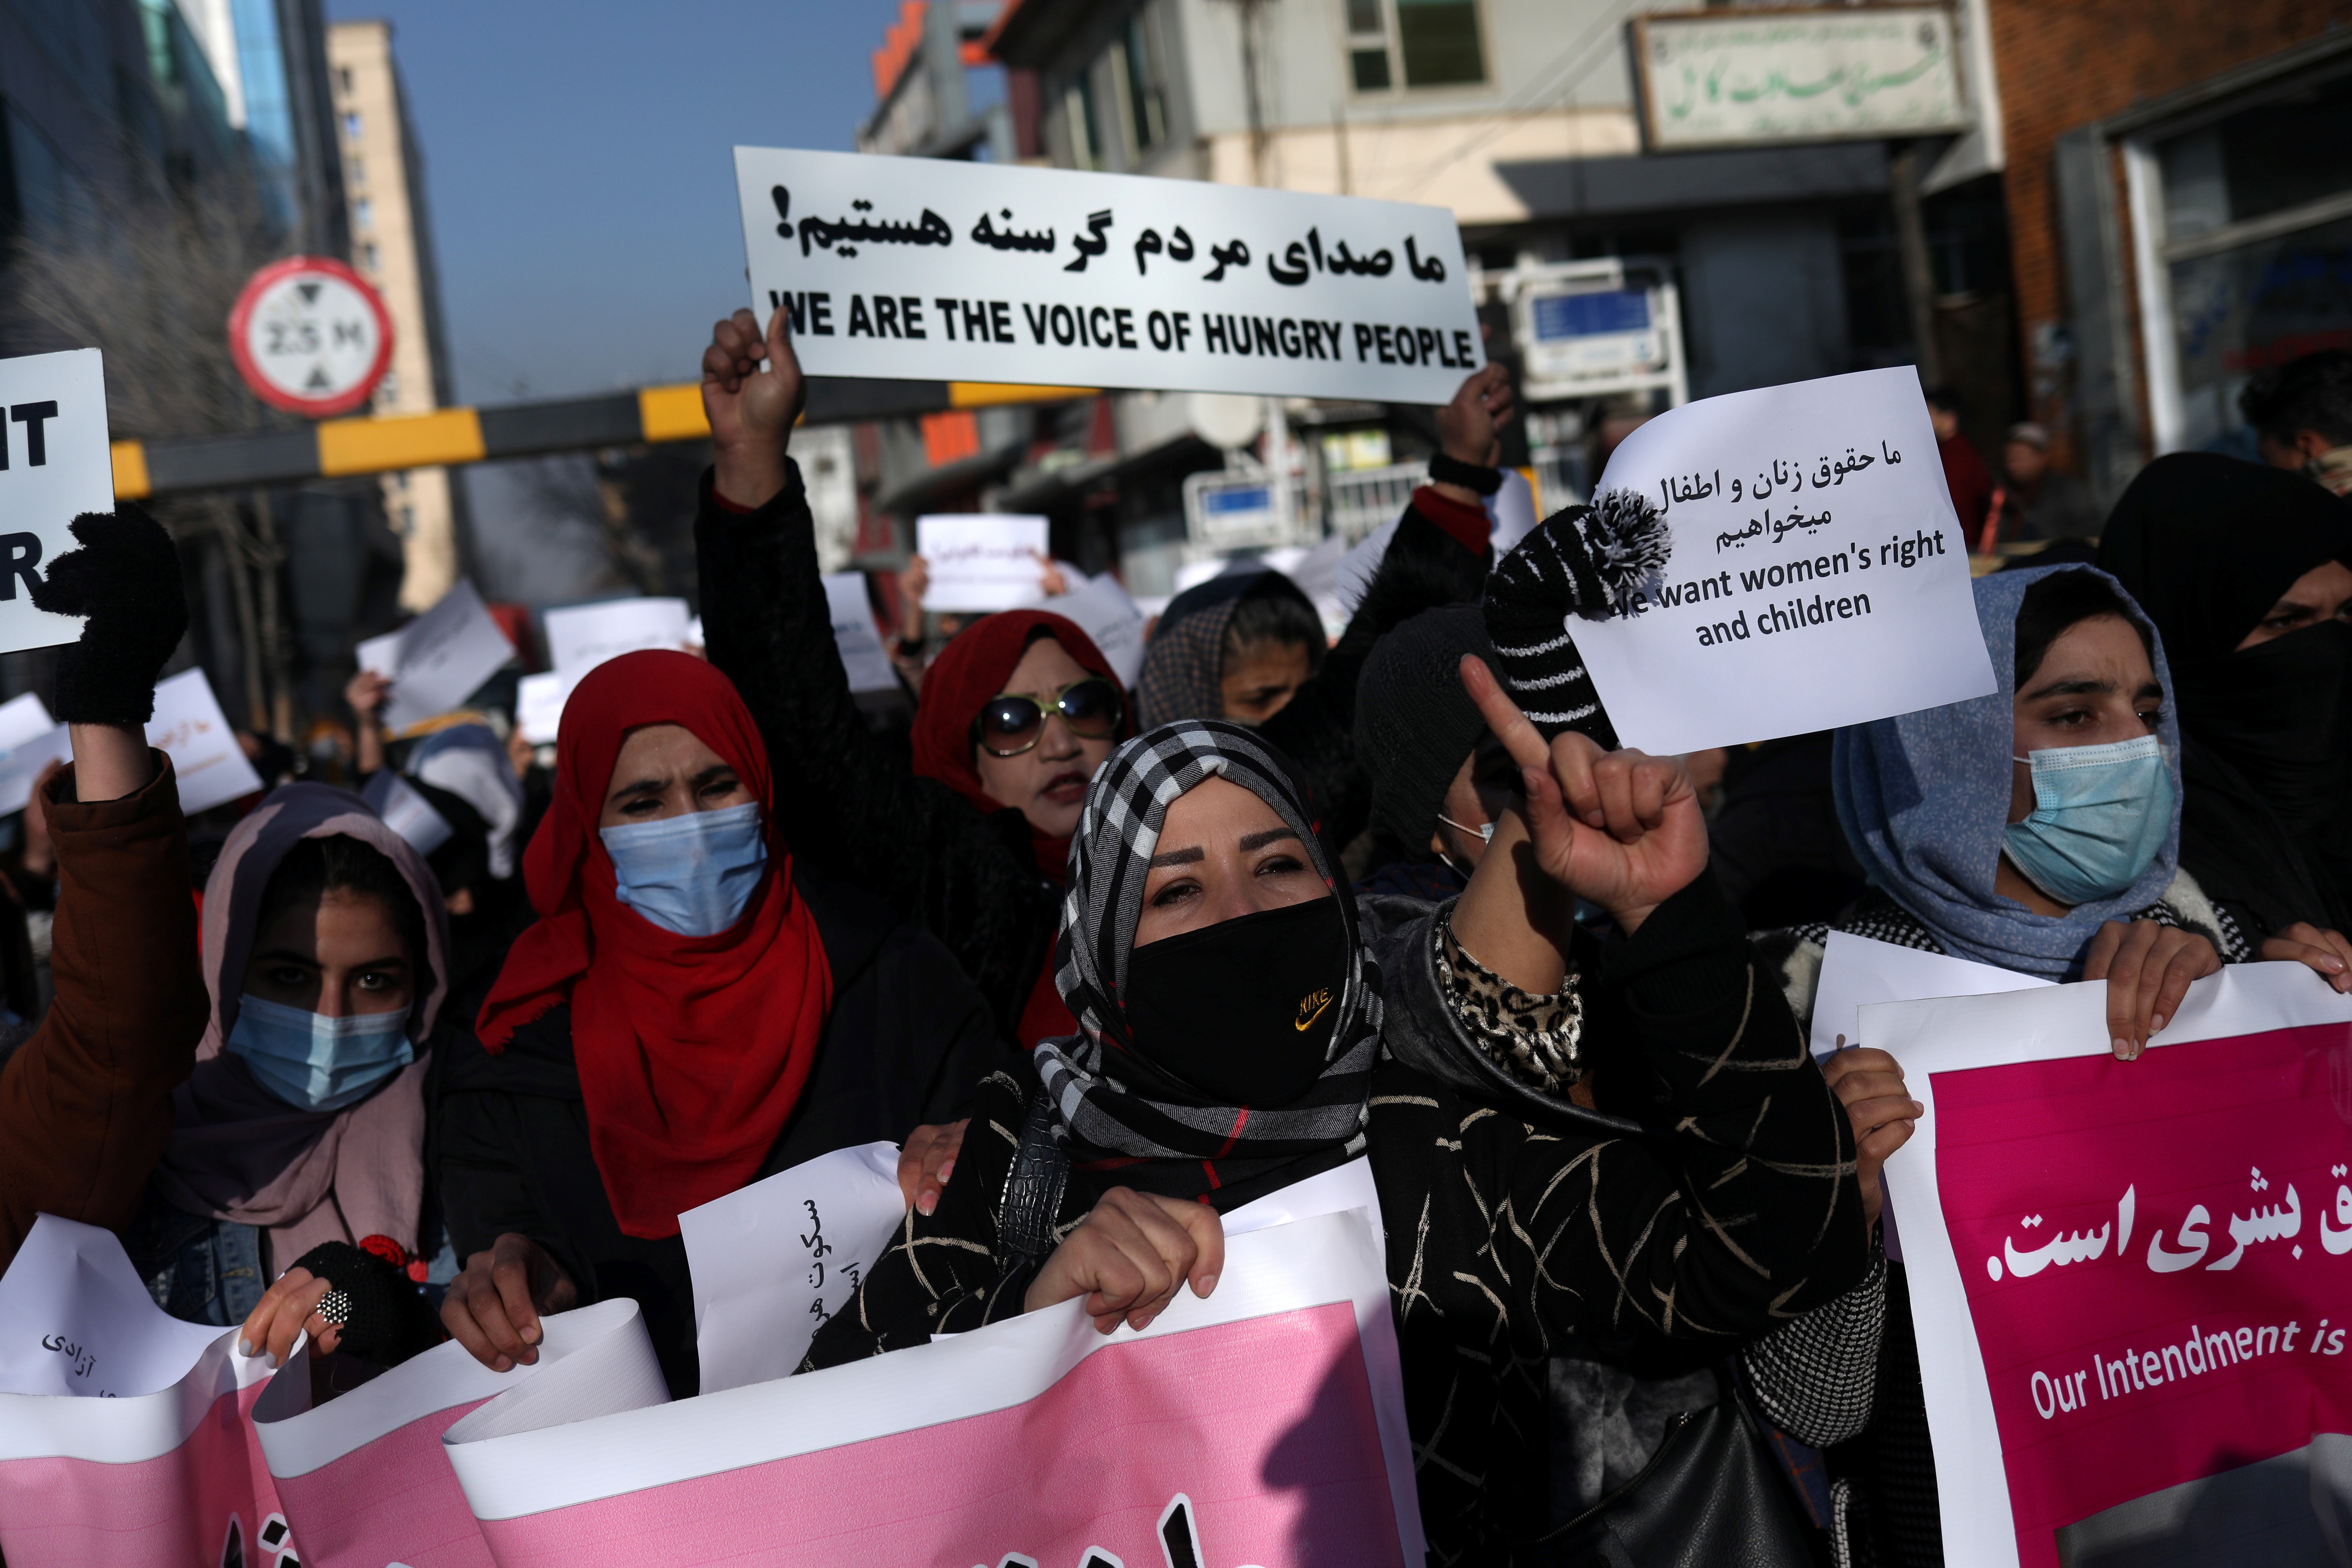 Afghan ladies present solidarity with Iranian protesters, face harsh Taliban crackdown